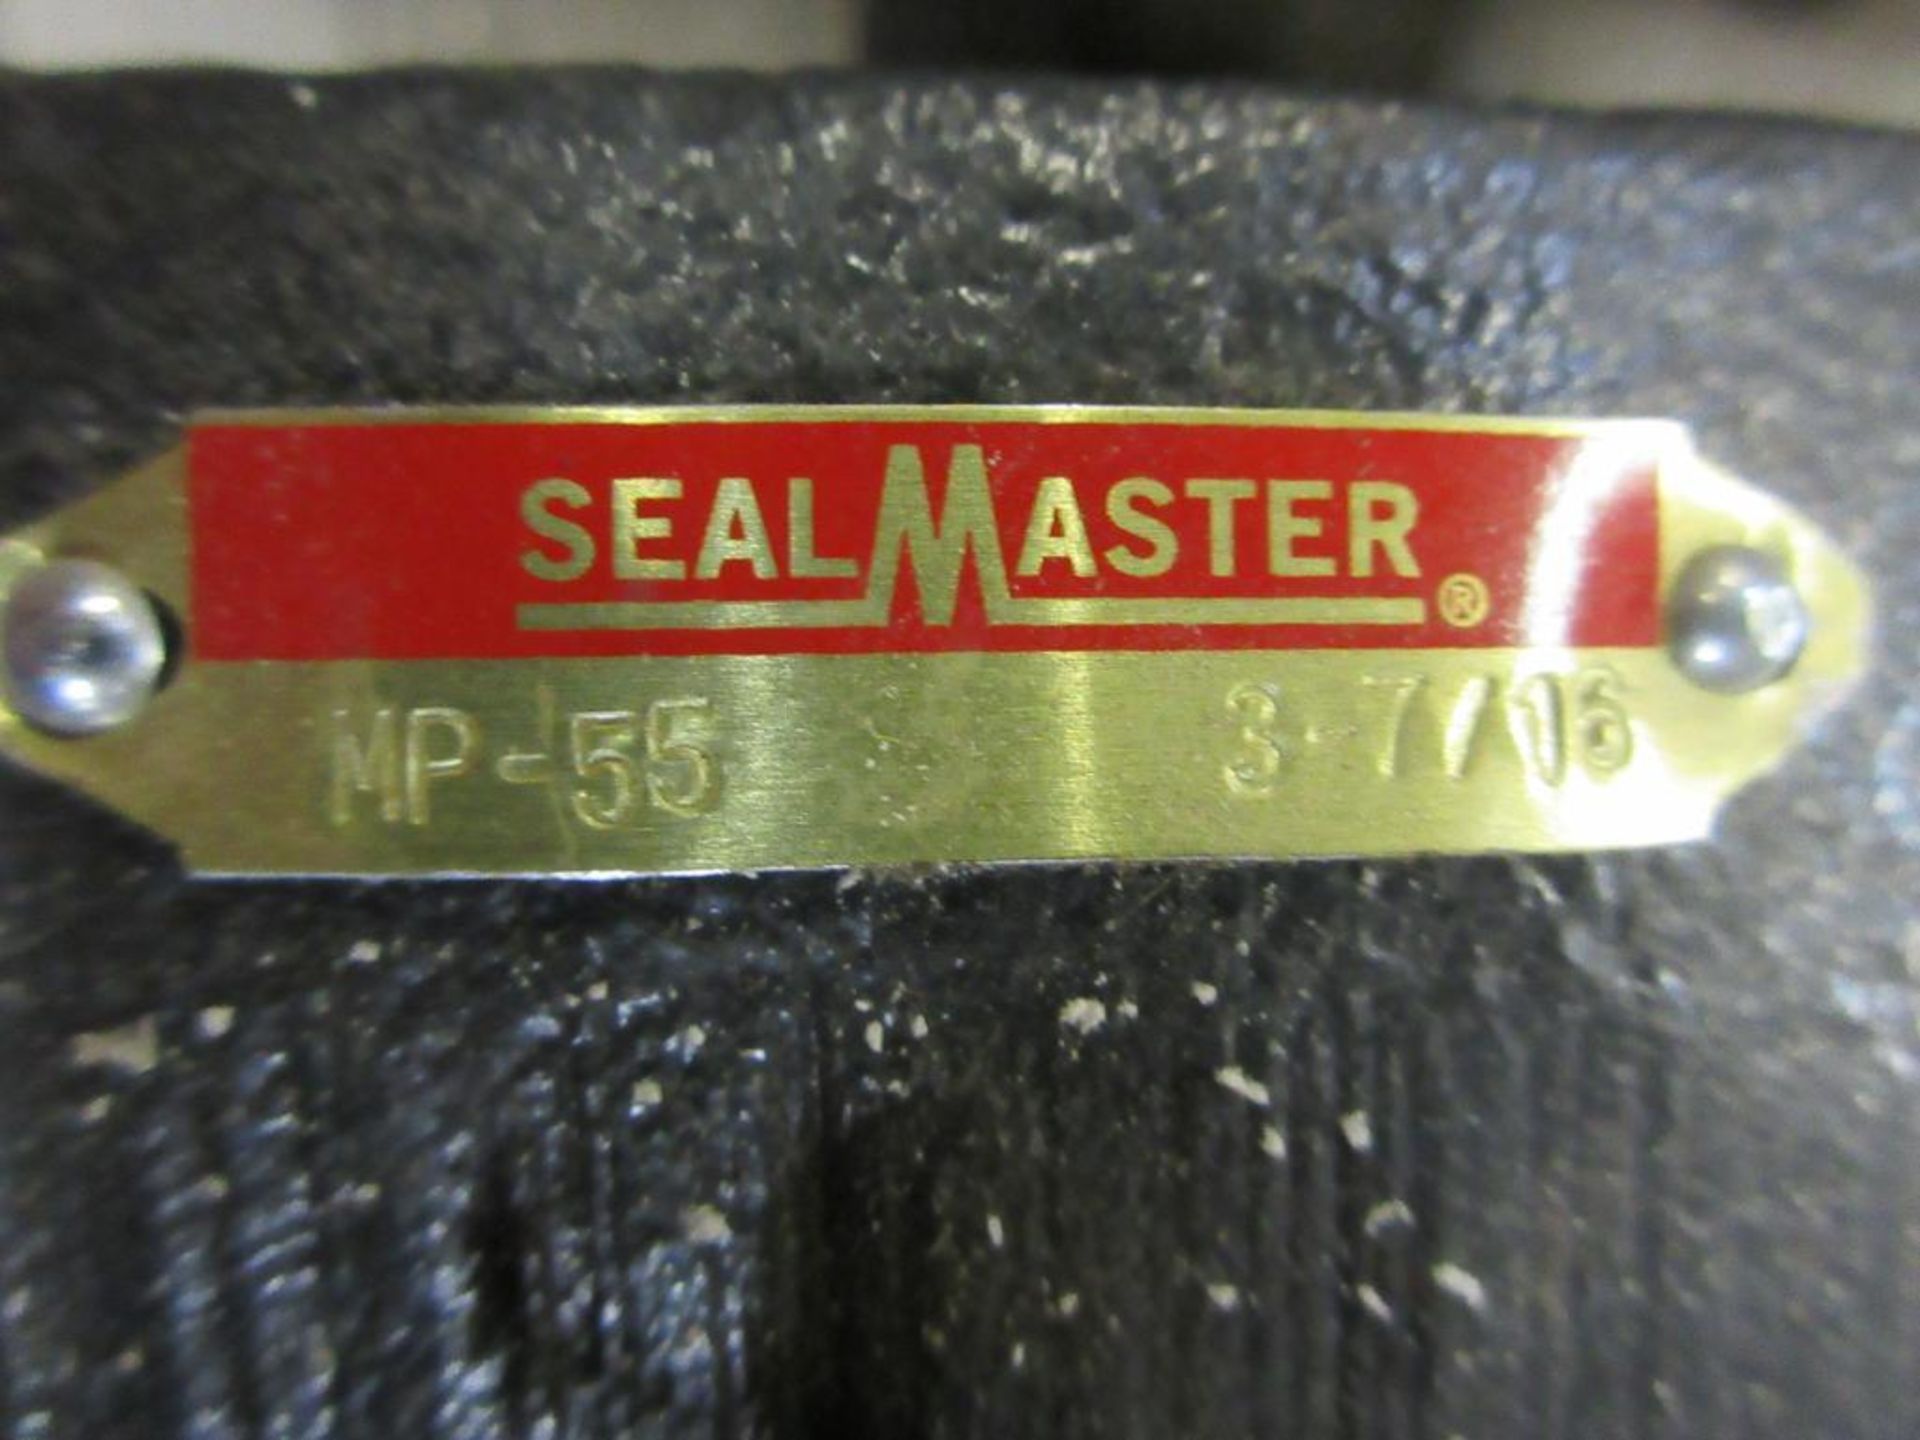 (4) SEALMASTER PILLOW BLOCKS INCLUDING (1) RPB 415-4 (2) MP-55 3-7/16 (1) MP-39 2-7/16 (THIS LOT IS - Image 6 of 8